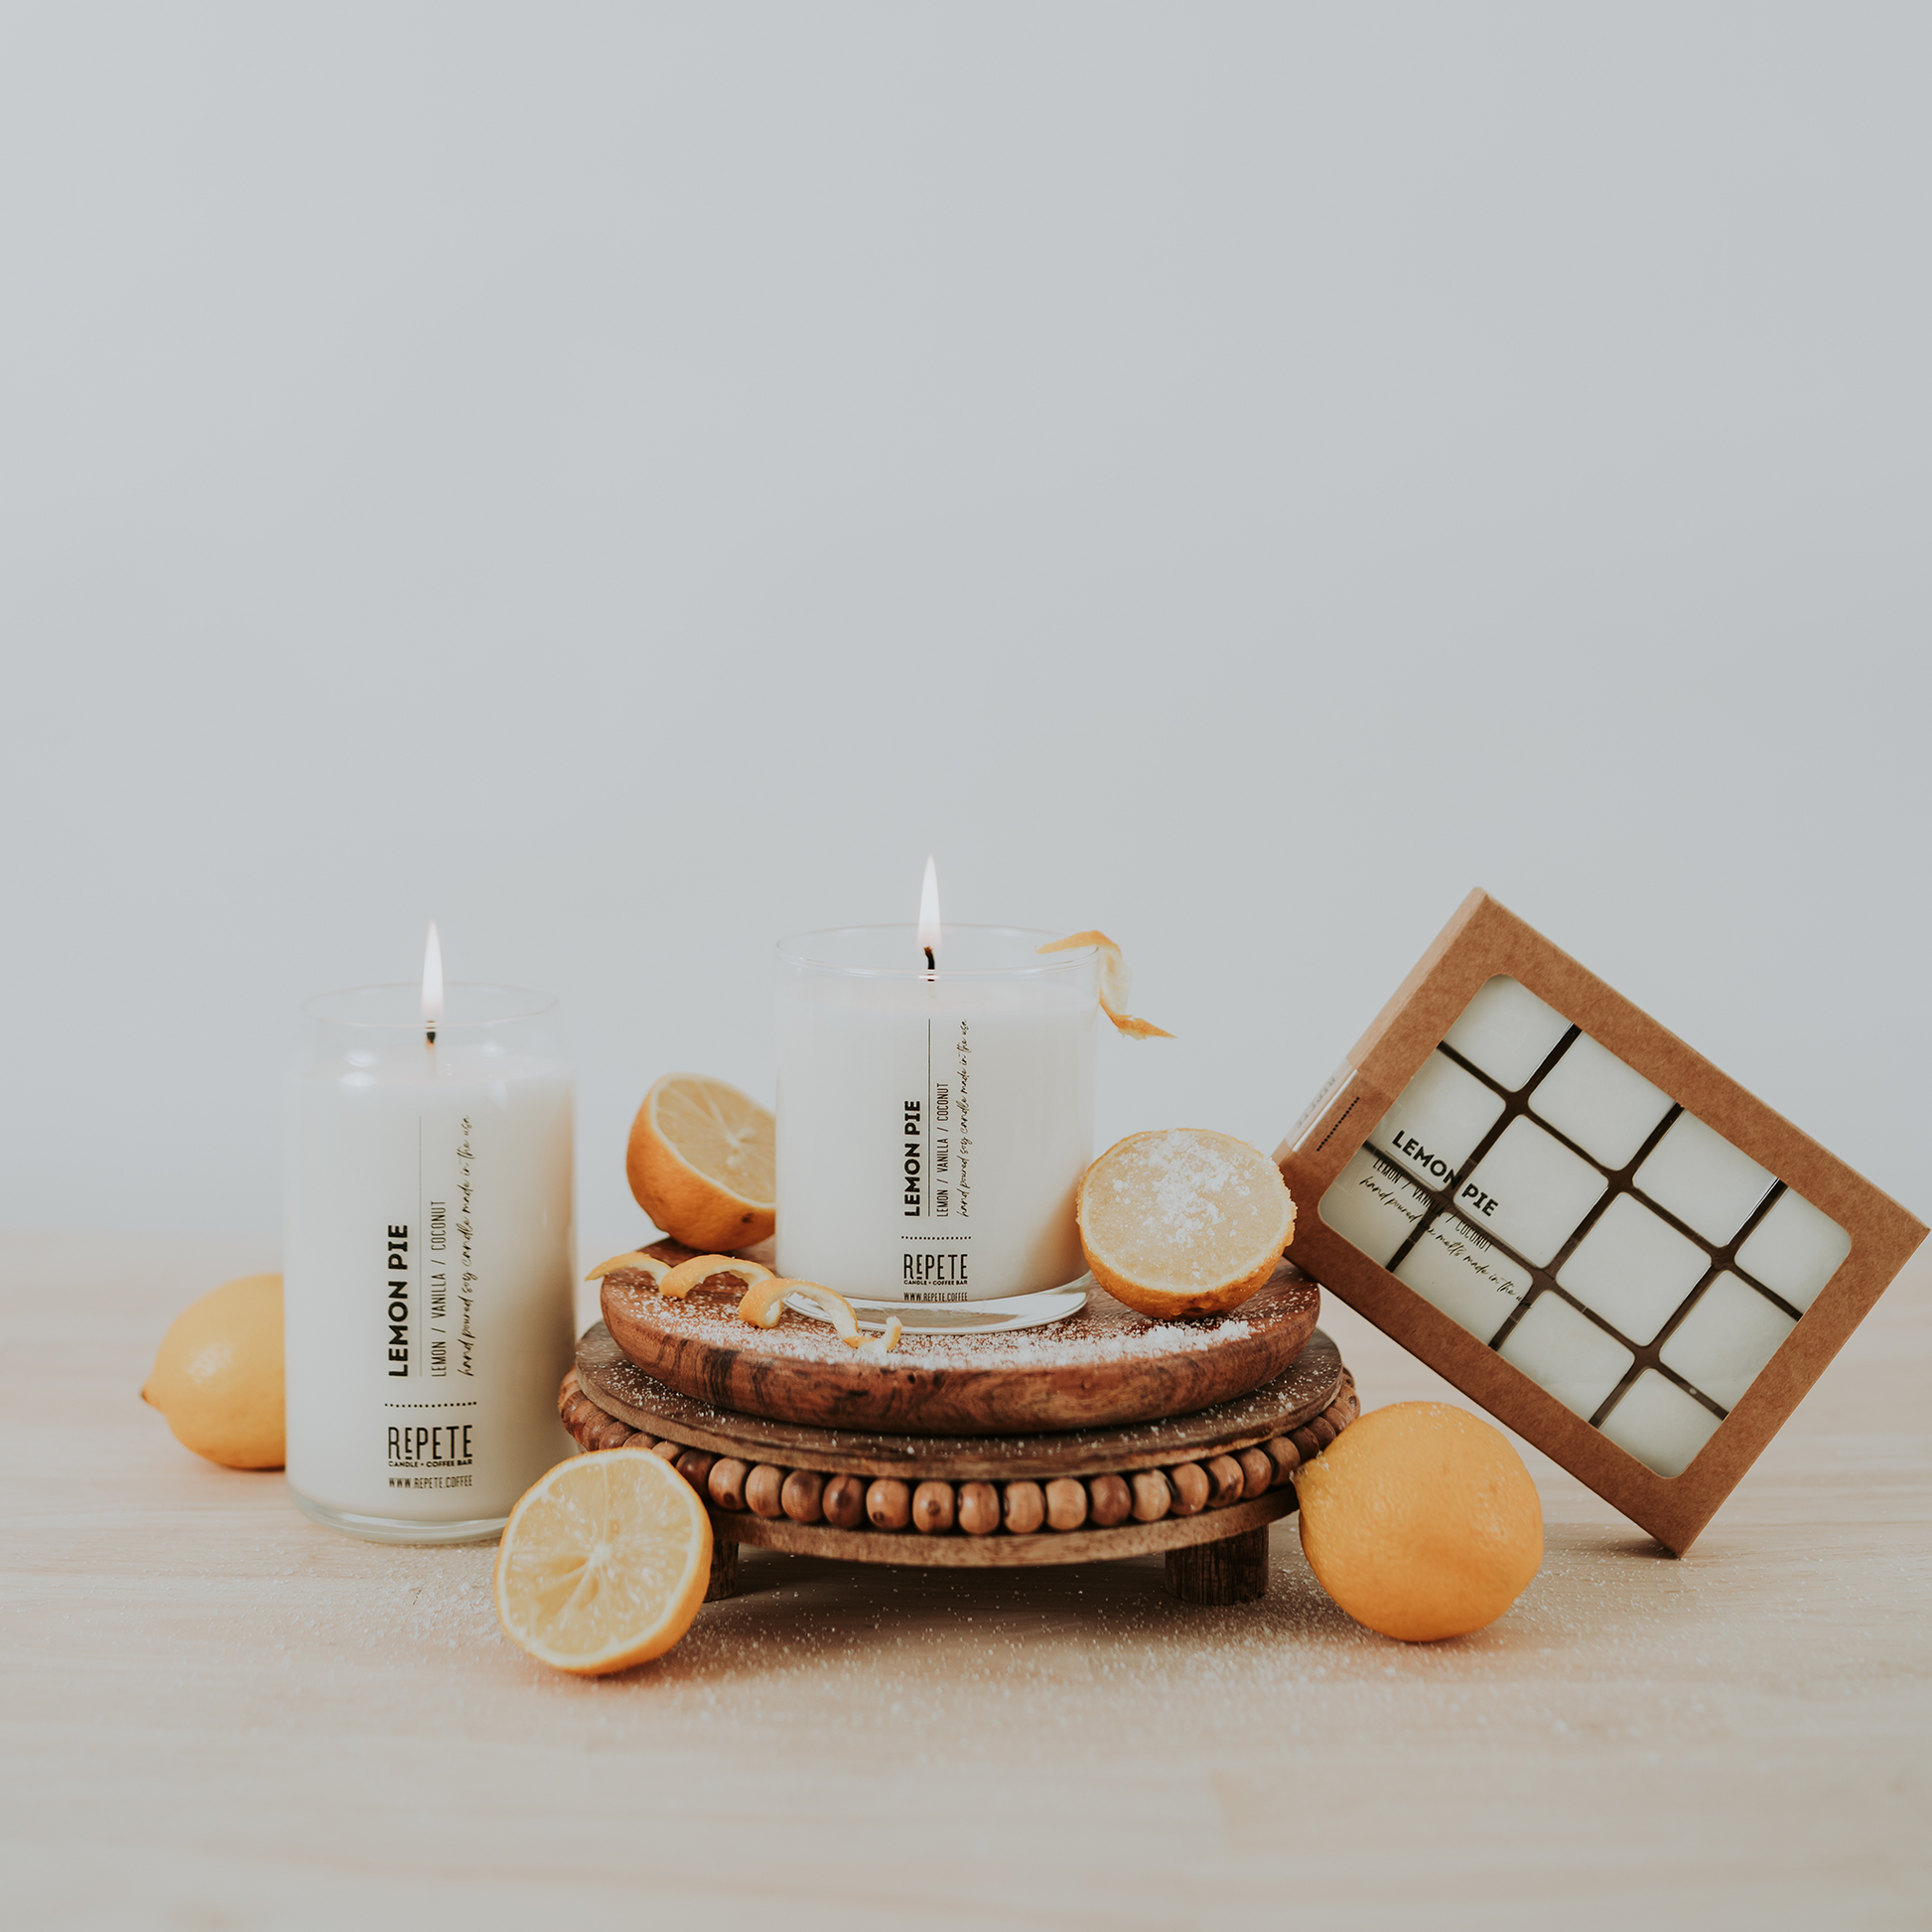 Lemon Pie scented products from Repete Candle and Coffee Bar